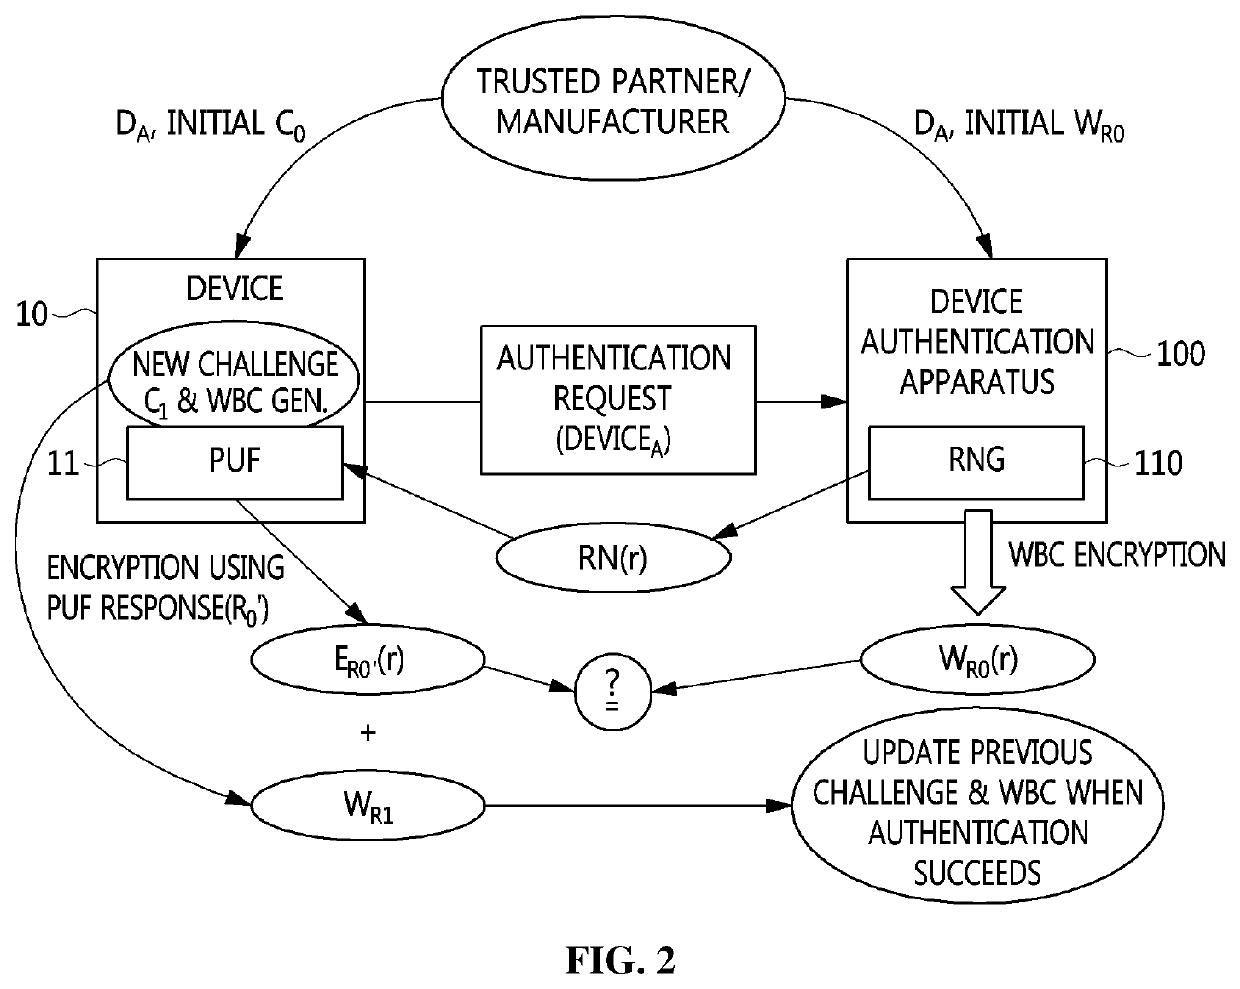 APPARATUS AND METHOD FOR AUTHENTICATING IoT DEVICE BASED ON PUF USING WHITE-BOX CRYPTOGRAPHY